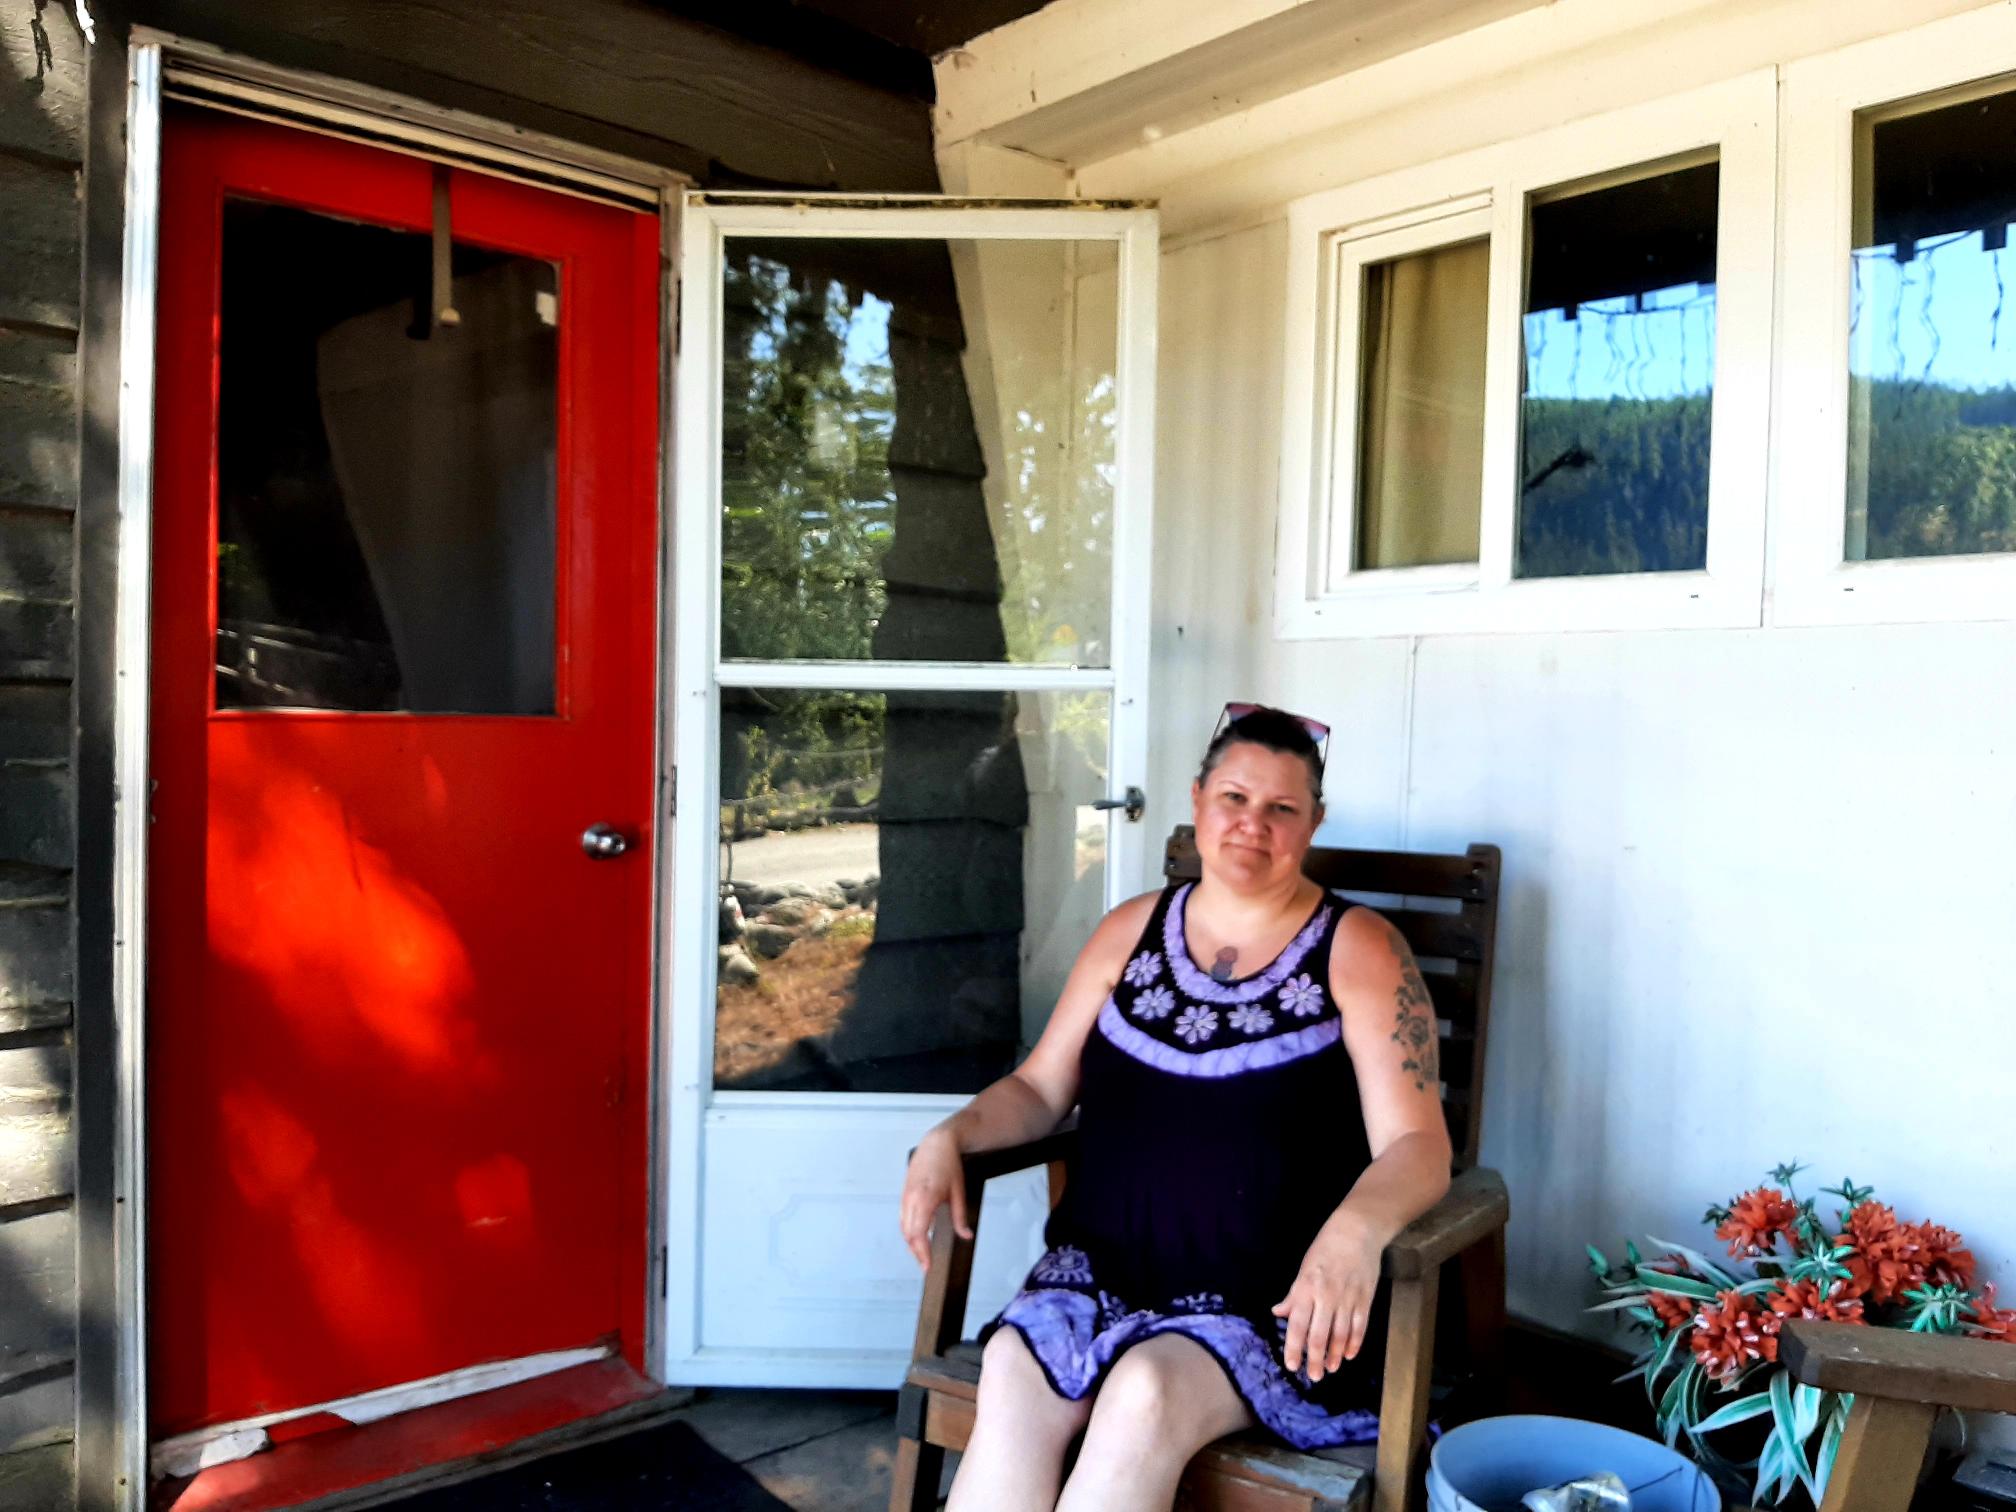 A woman sits on a chair outside a home on the porch. There's a red door to her right and a white trim behind her